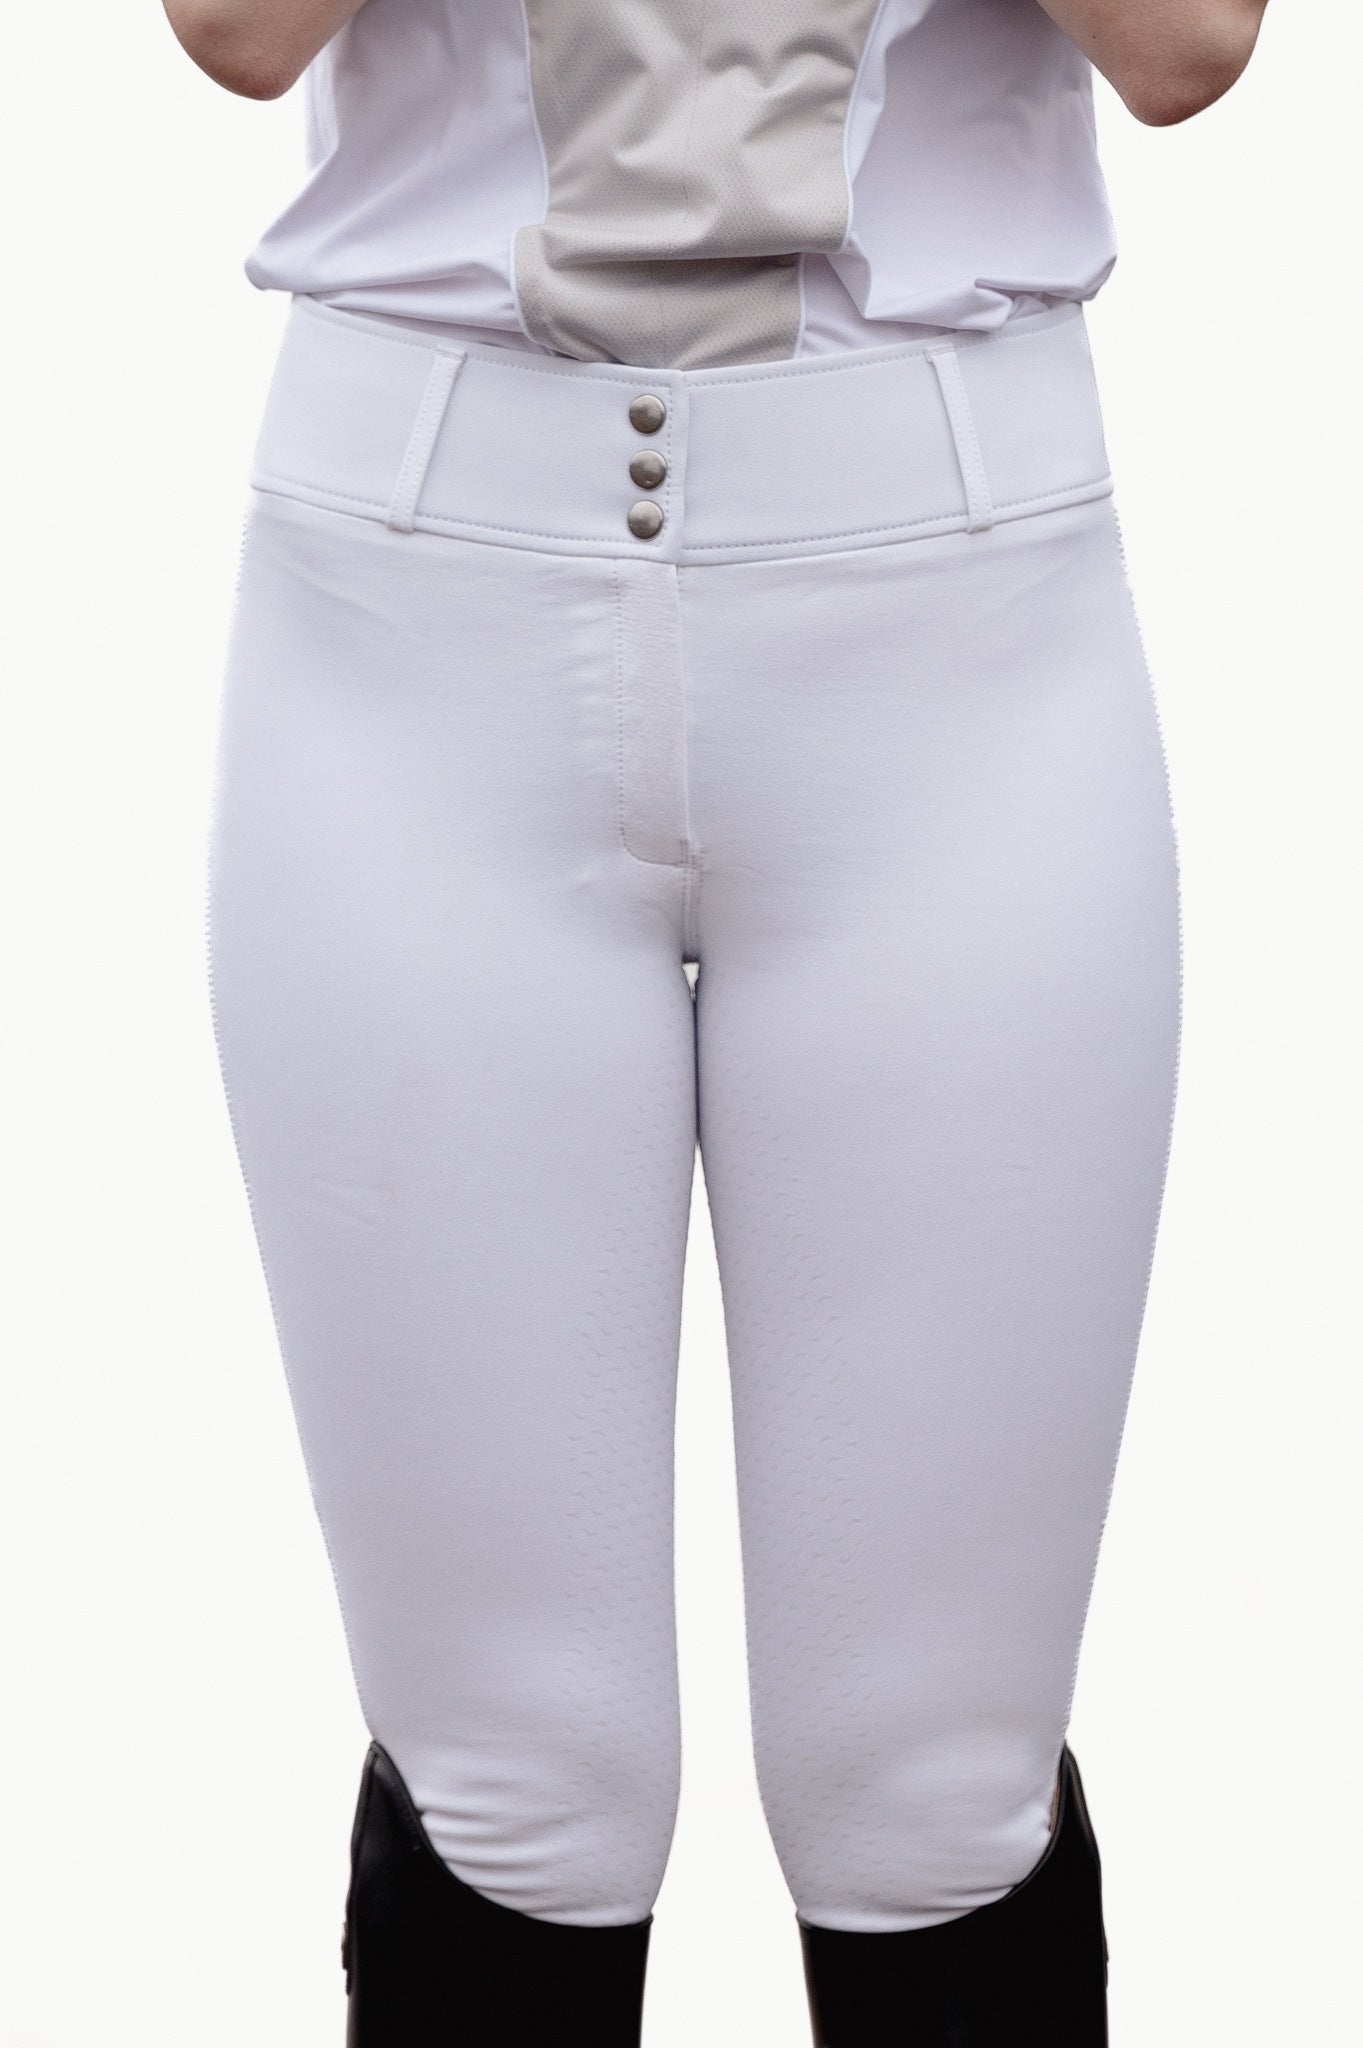 Brittany all white show breeches